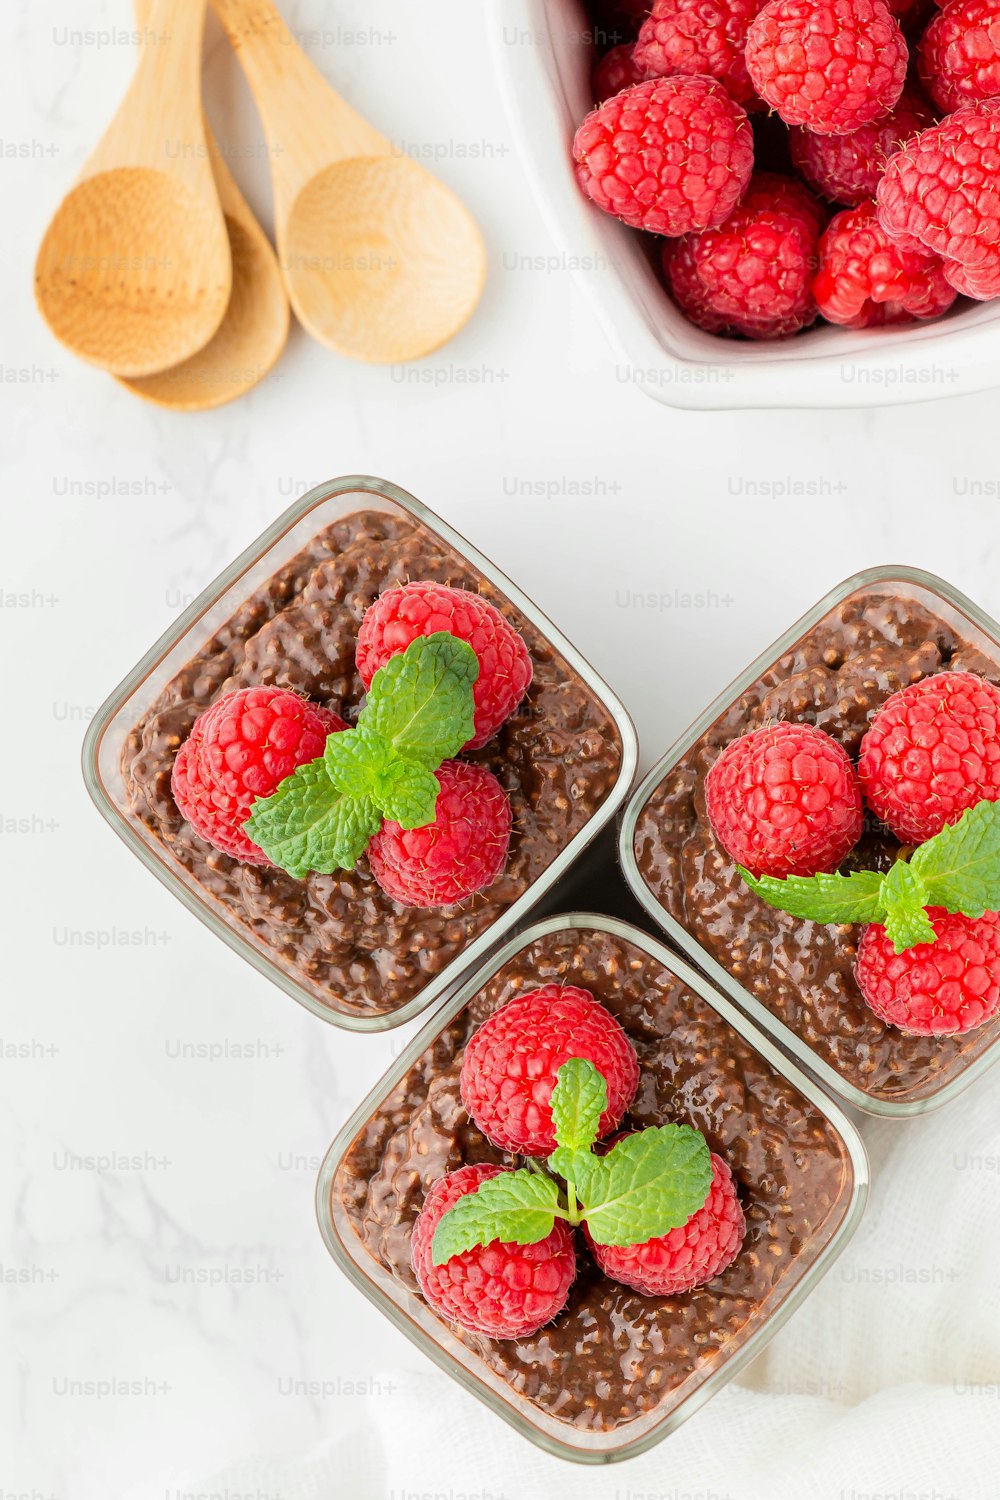 four small glass containers filled with chocolate pudding and raspberries